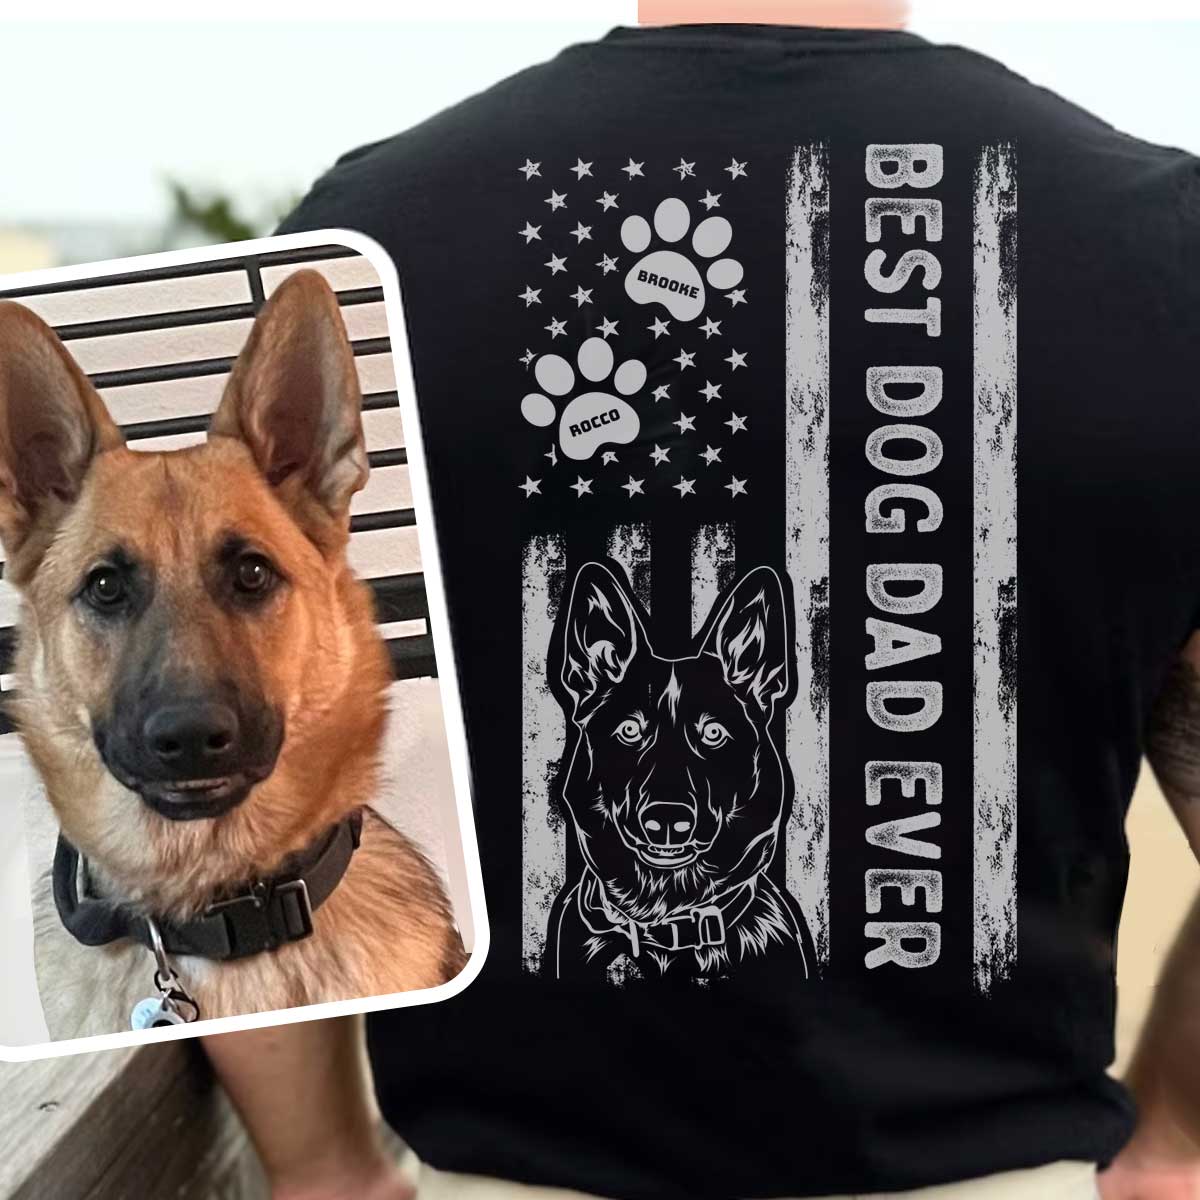 Awesome Personalized Best Dog Dad Ever Shirt - With Custom Drawn Dog Portrait & Names of Dad & Dog